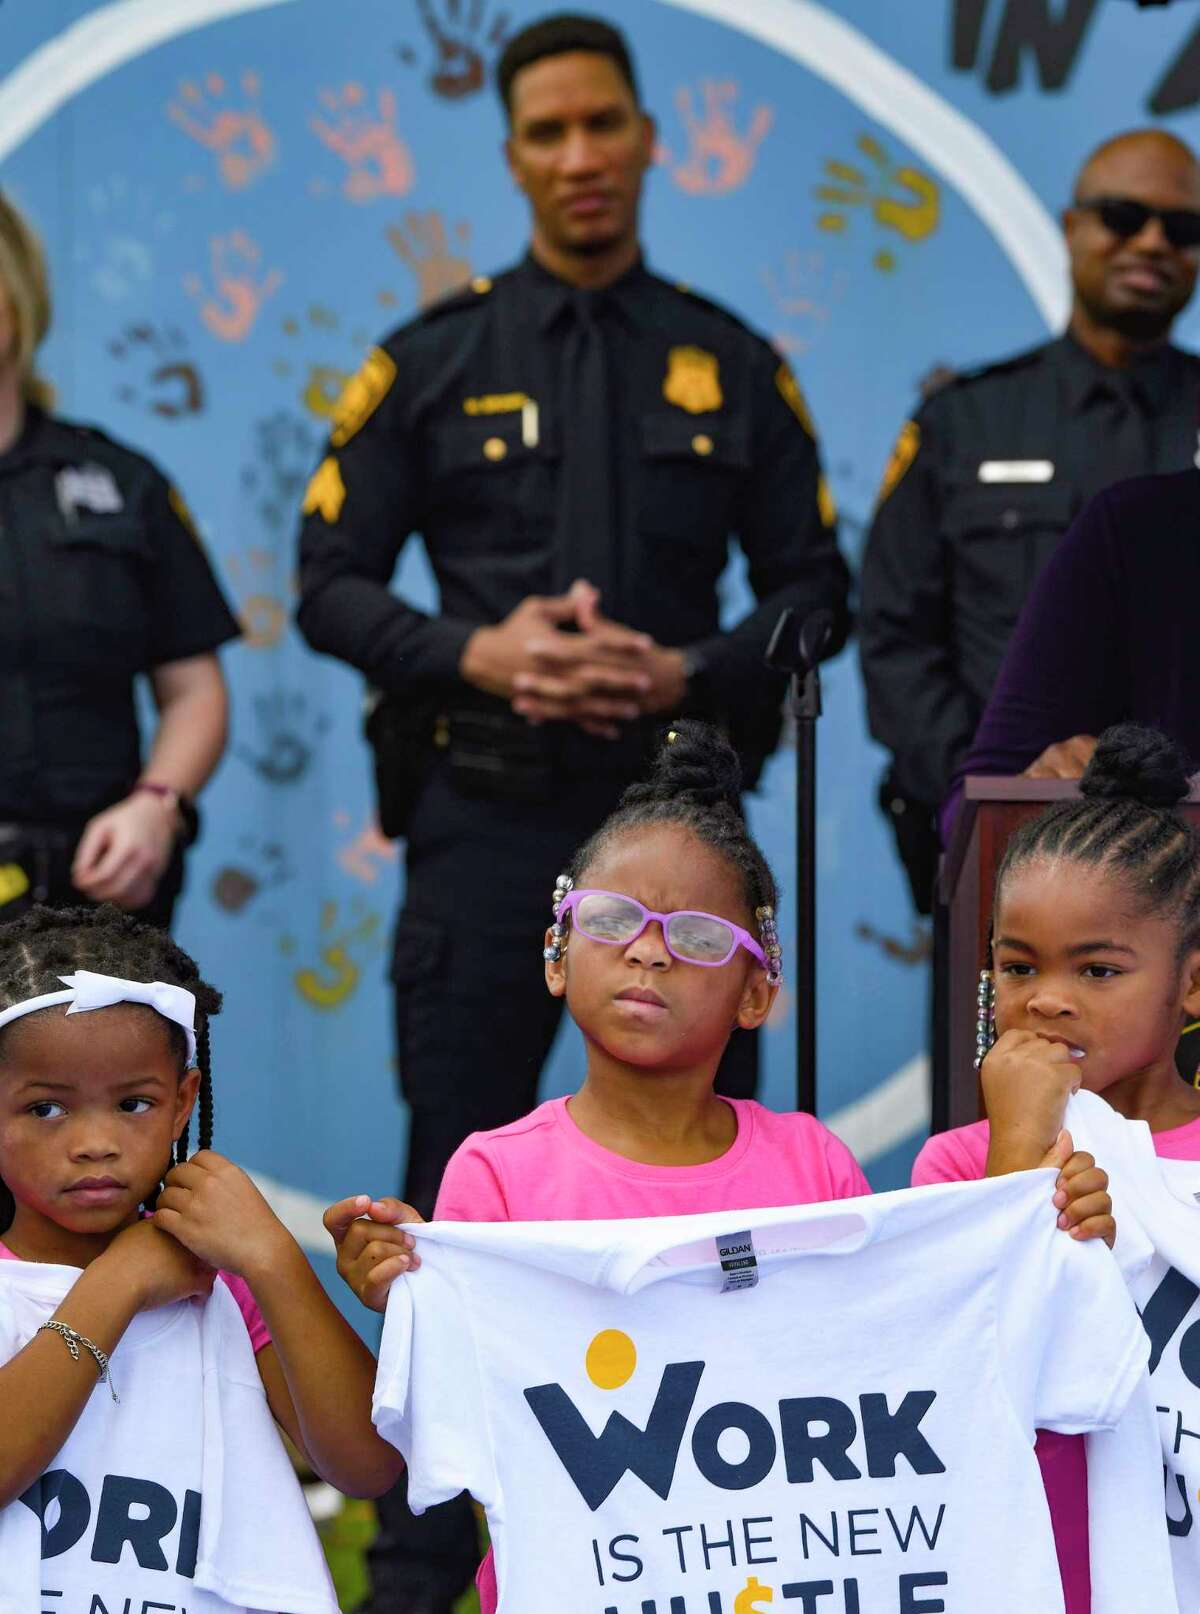 Laini Simmons, middle, and other children participate during the launch of the ‘Work is the New Hustle” program at the Eastside Boys & Girls Club on Tuesday. The program is the brainchild of Laura Thompson of The African American Network TV and aims to improve relations between Black children and police by involving the San Antonio Black Police Officers Coalition. The children are to learn life skills, such as budgeting their money.